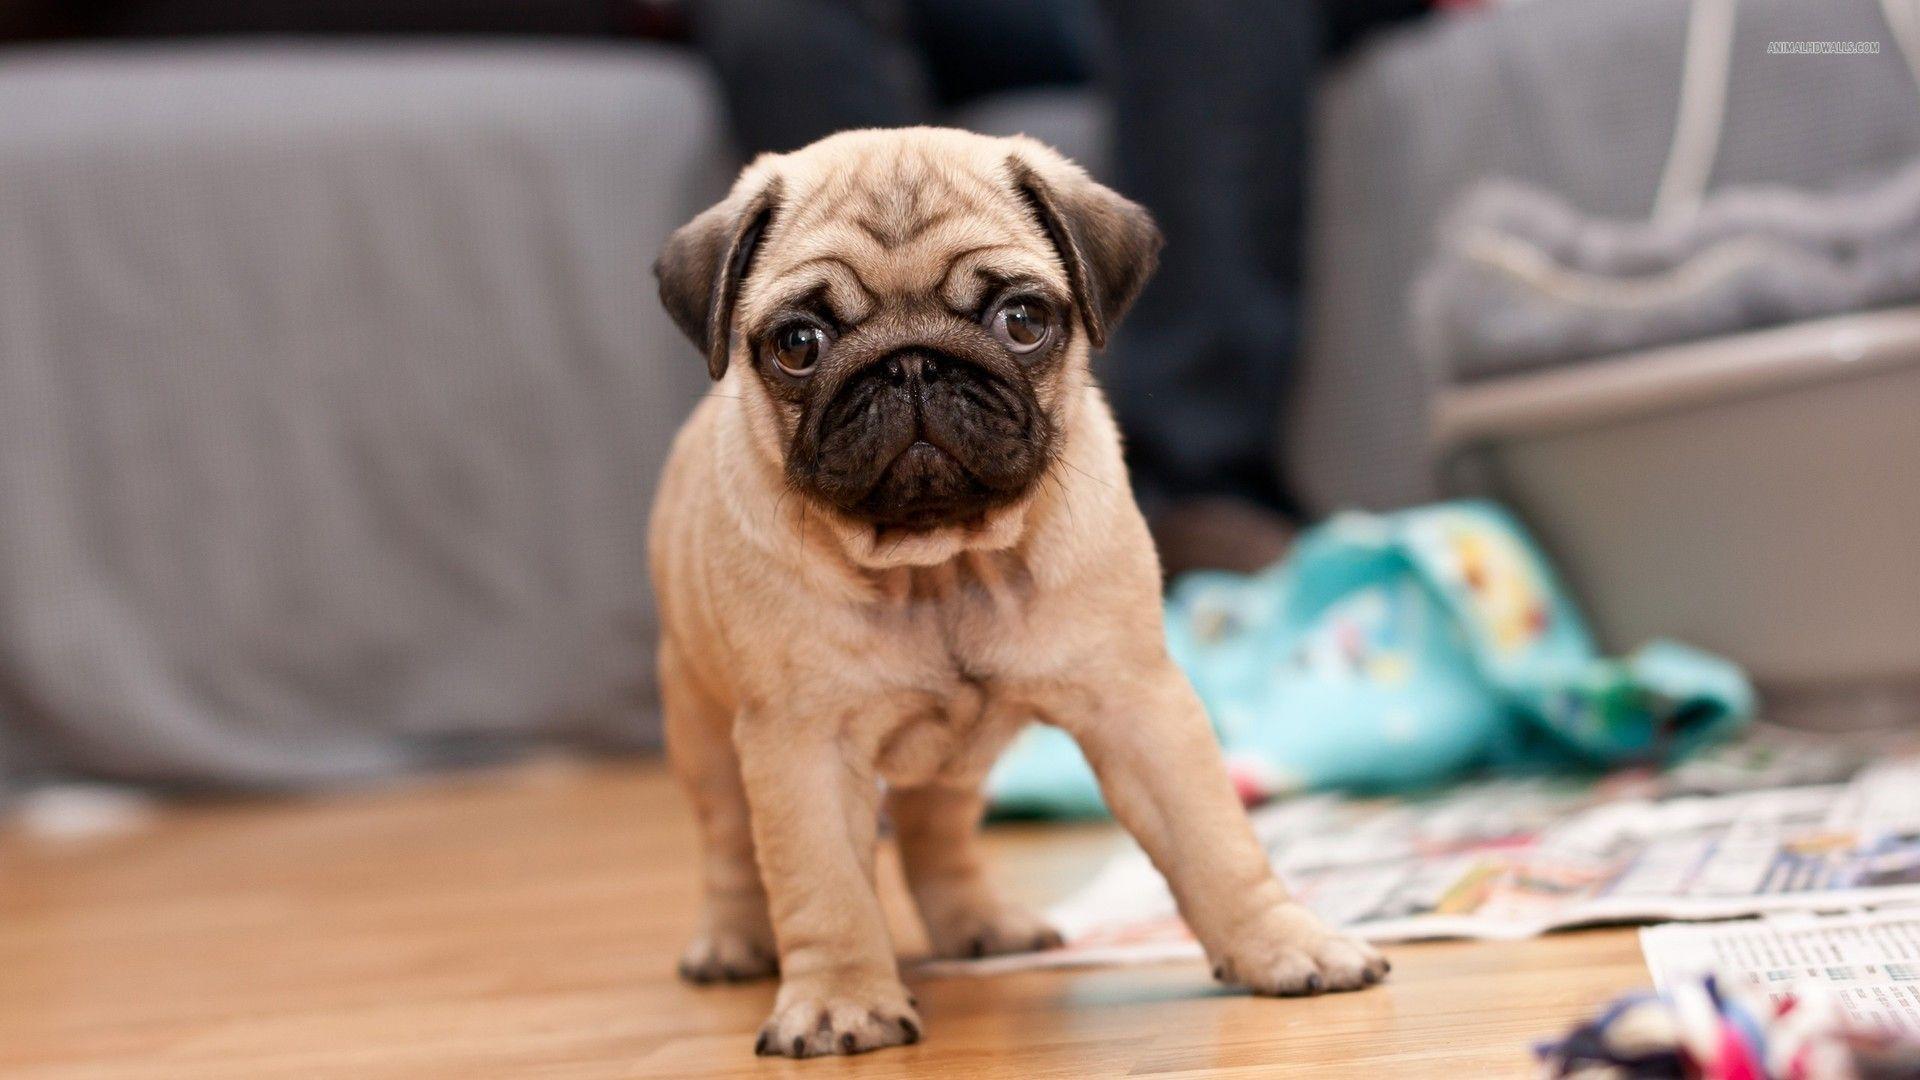 Very Cute Pug Puppy Picture And Photo